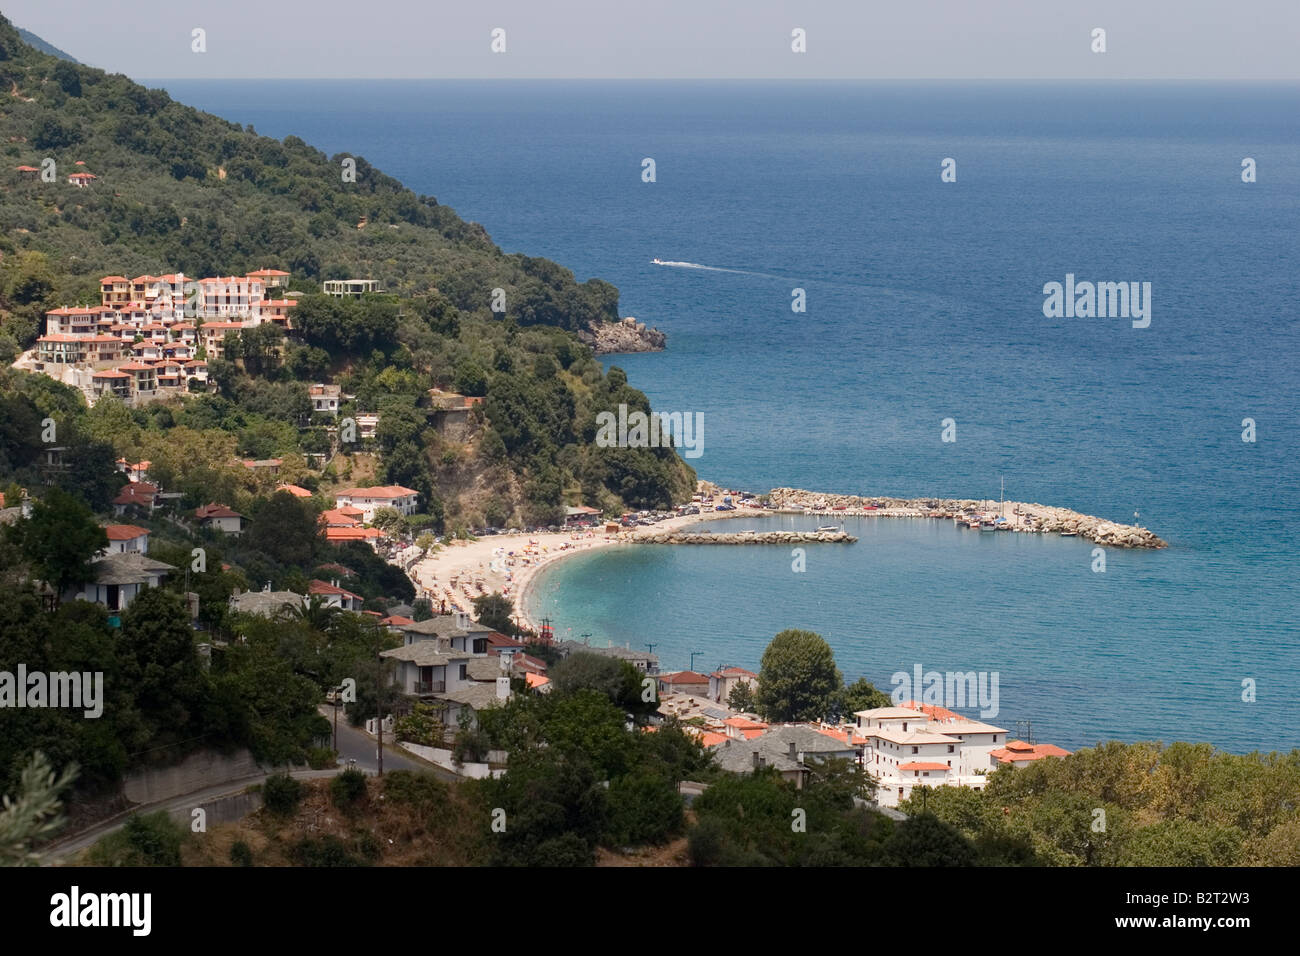 Greece Thessaly Agios Ioannis Pelion High Resolution Stock Photography and  Images - Alamy